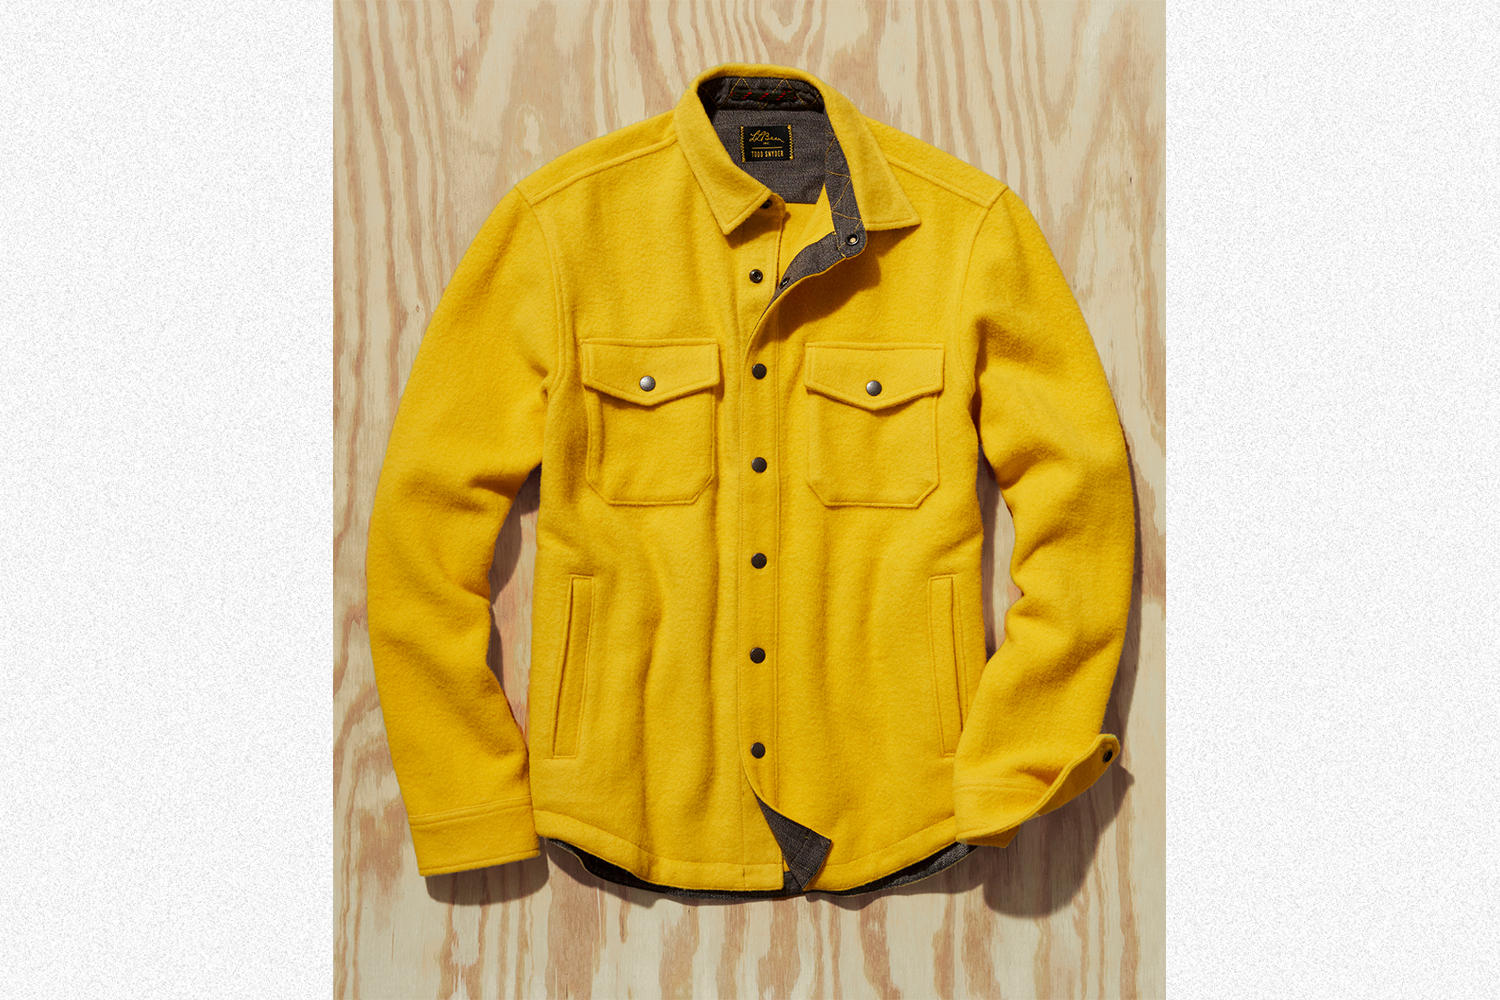 Todd Snyder x L.L.Bean Wool Shirt Jacket in Amber Gold